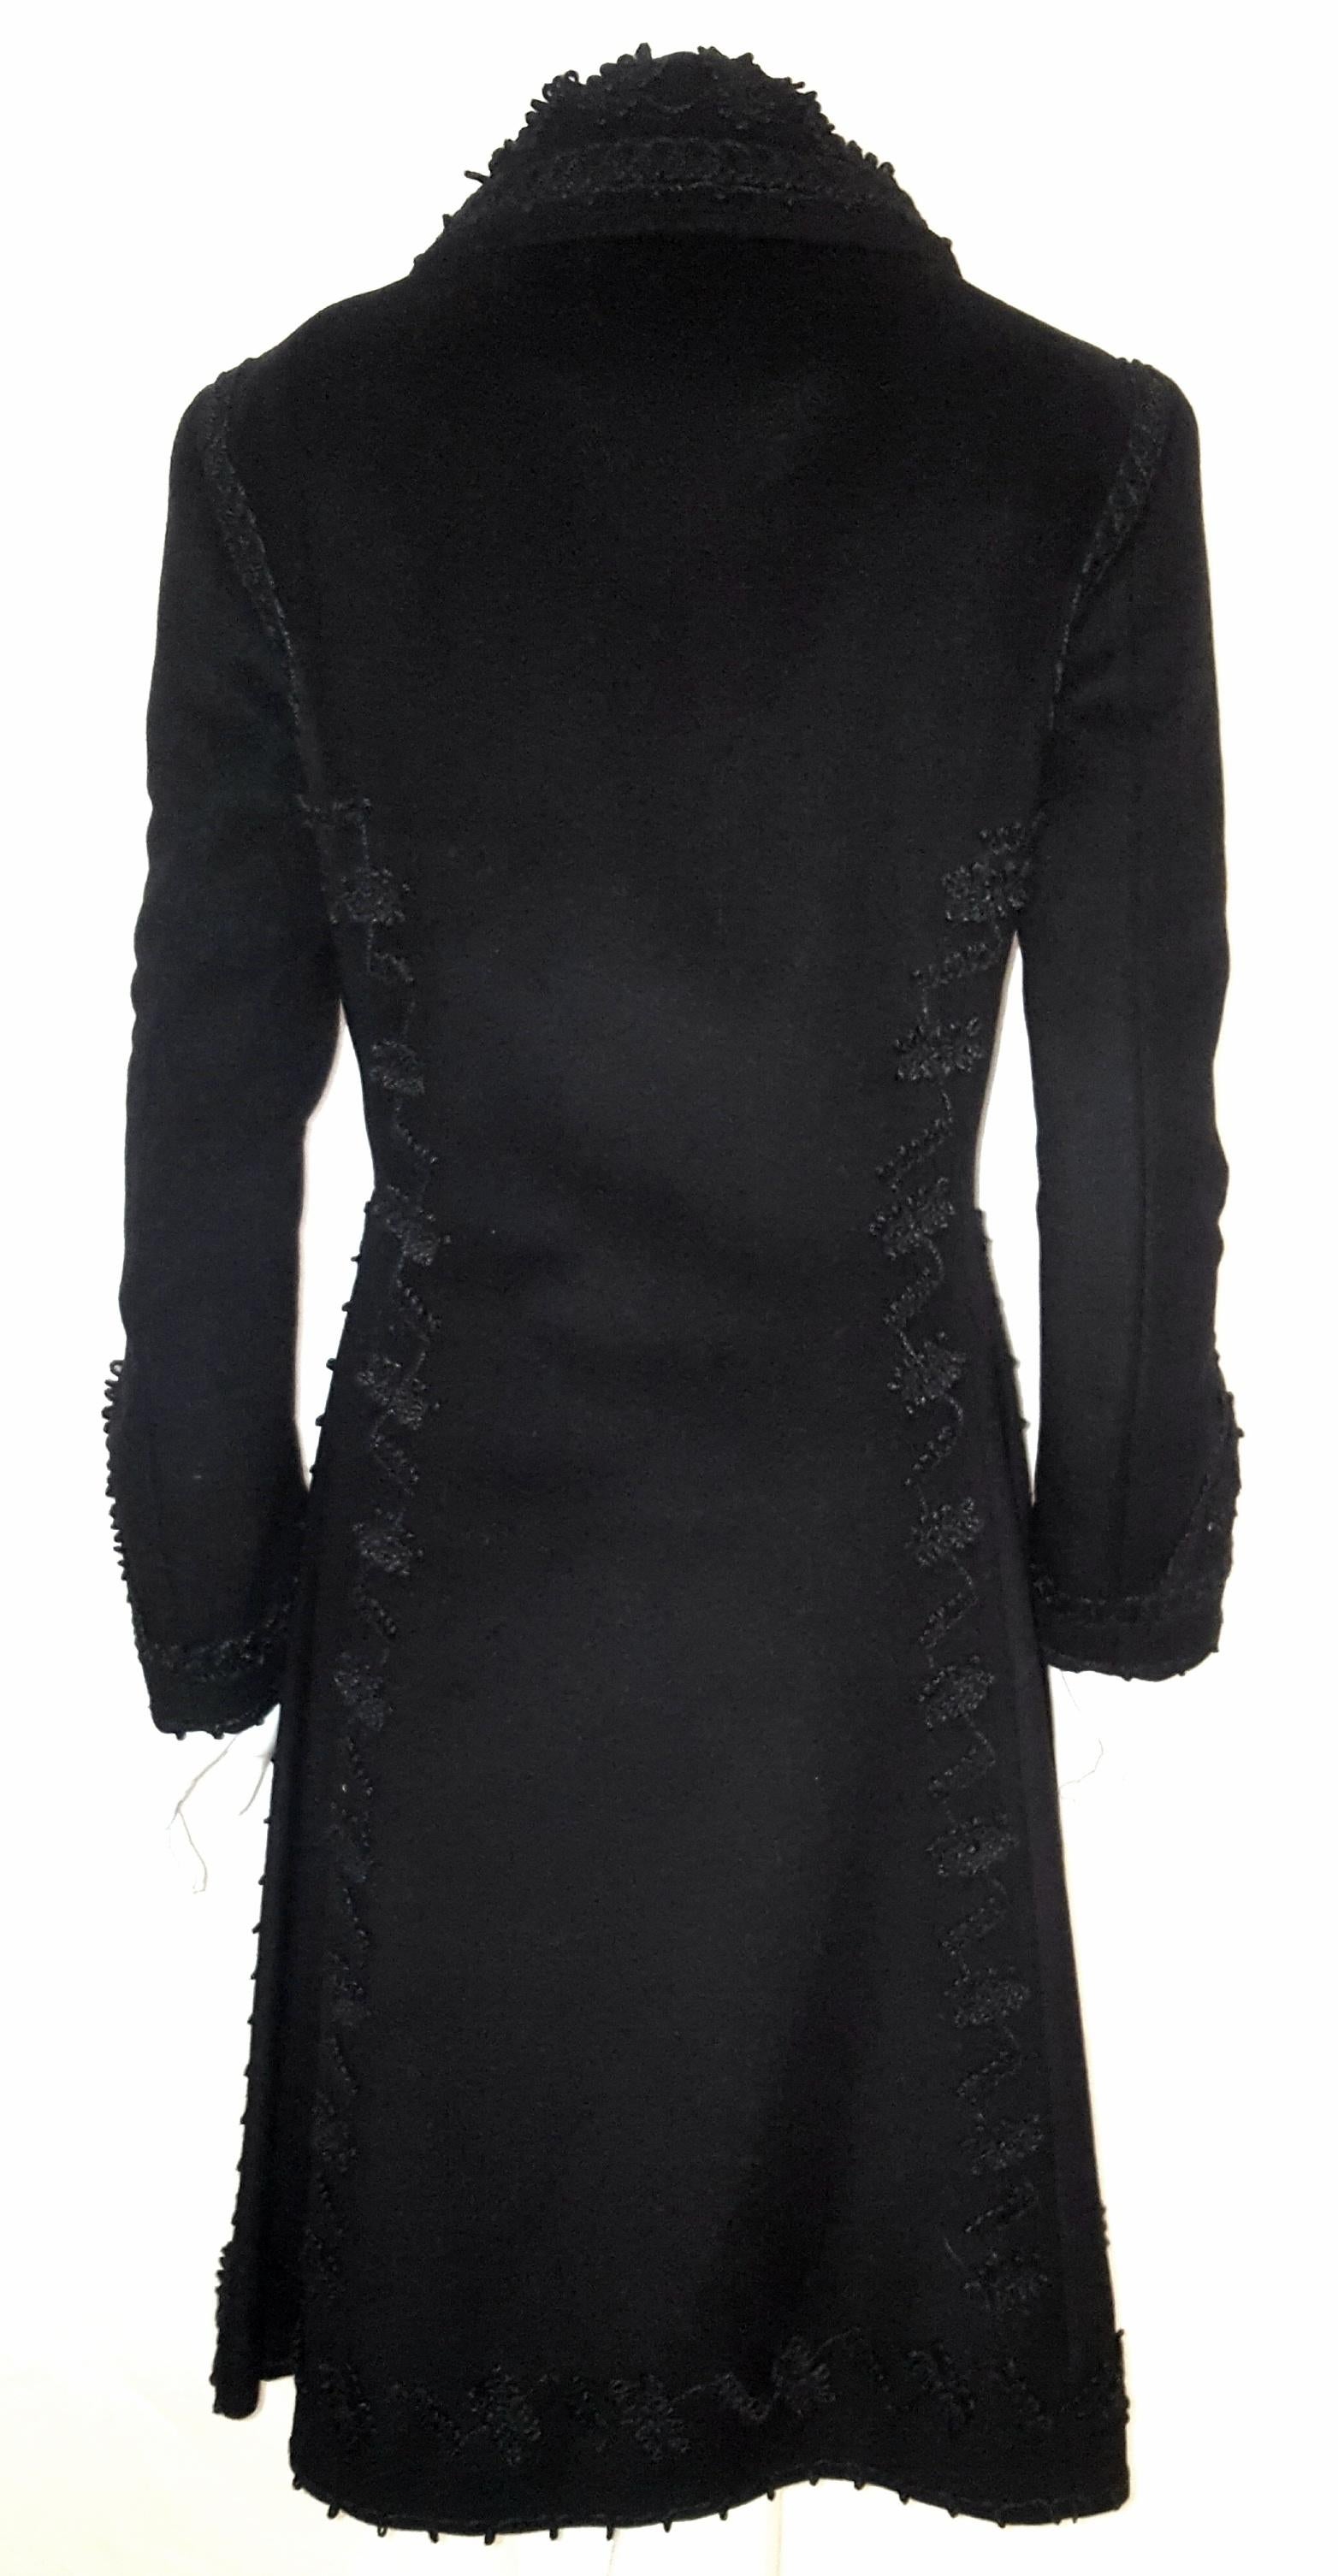 Moschino Black Virgin Wool Embroidered Coat W/ Front Closure Two Way Zipper In Excellent Condition For Sale In Palm Beach, FL